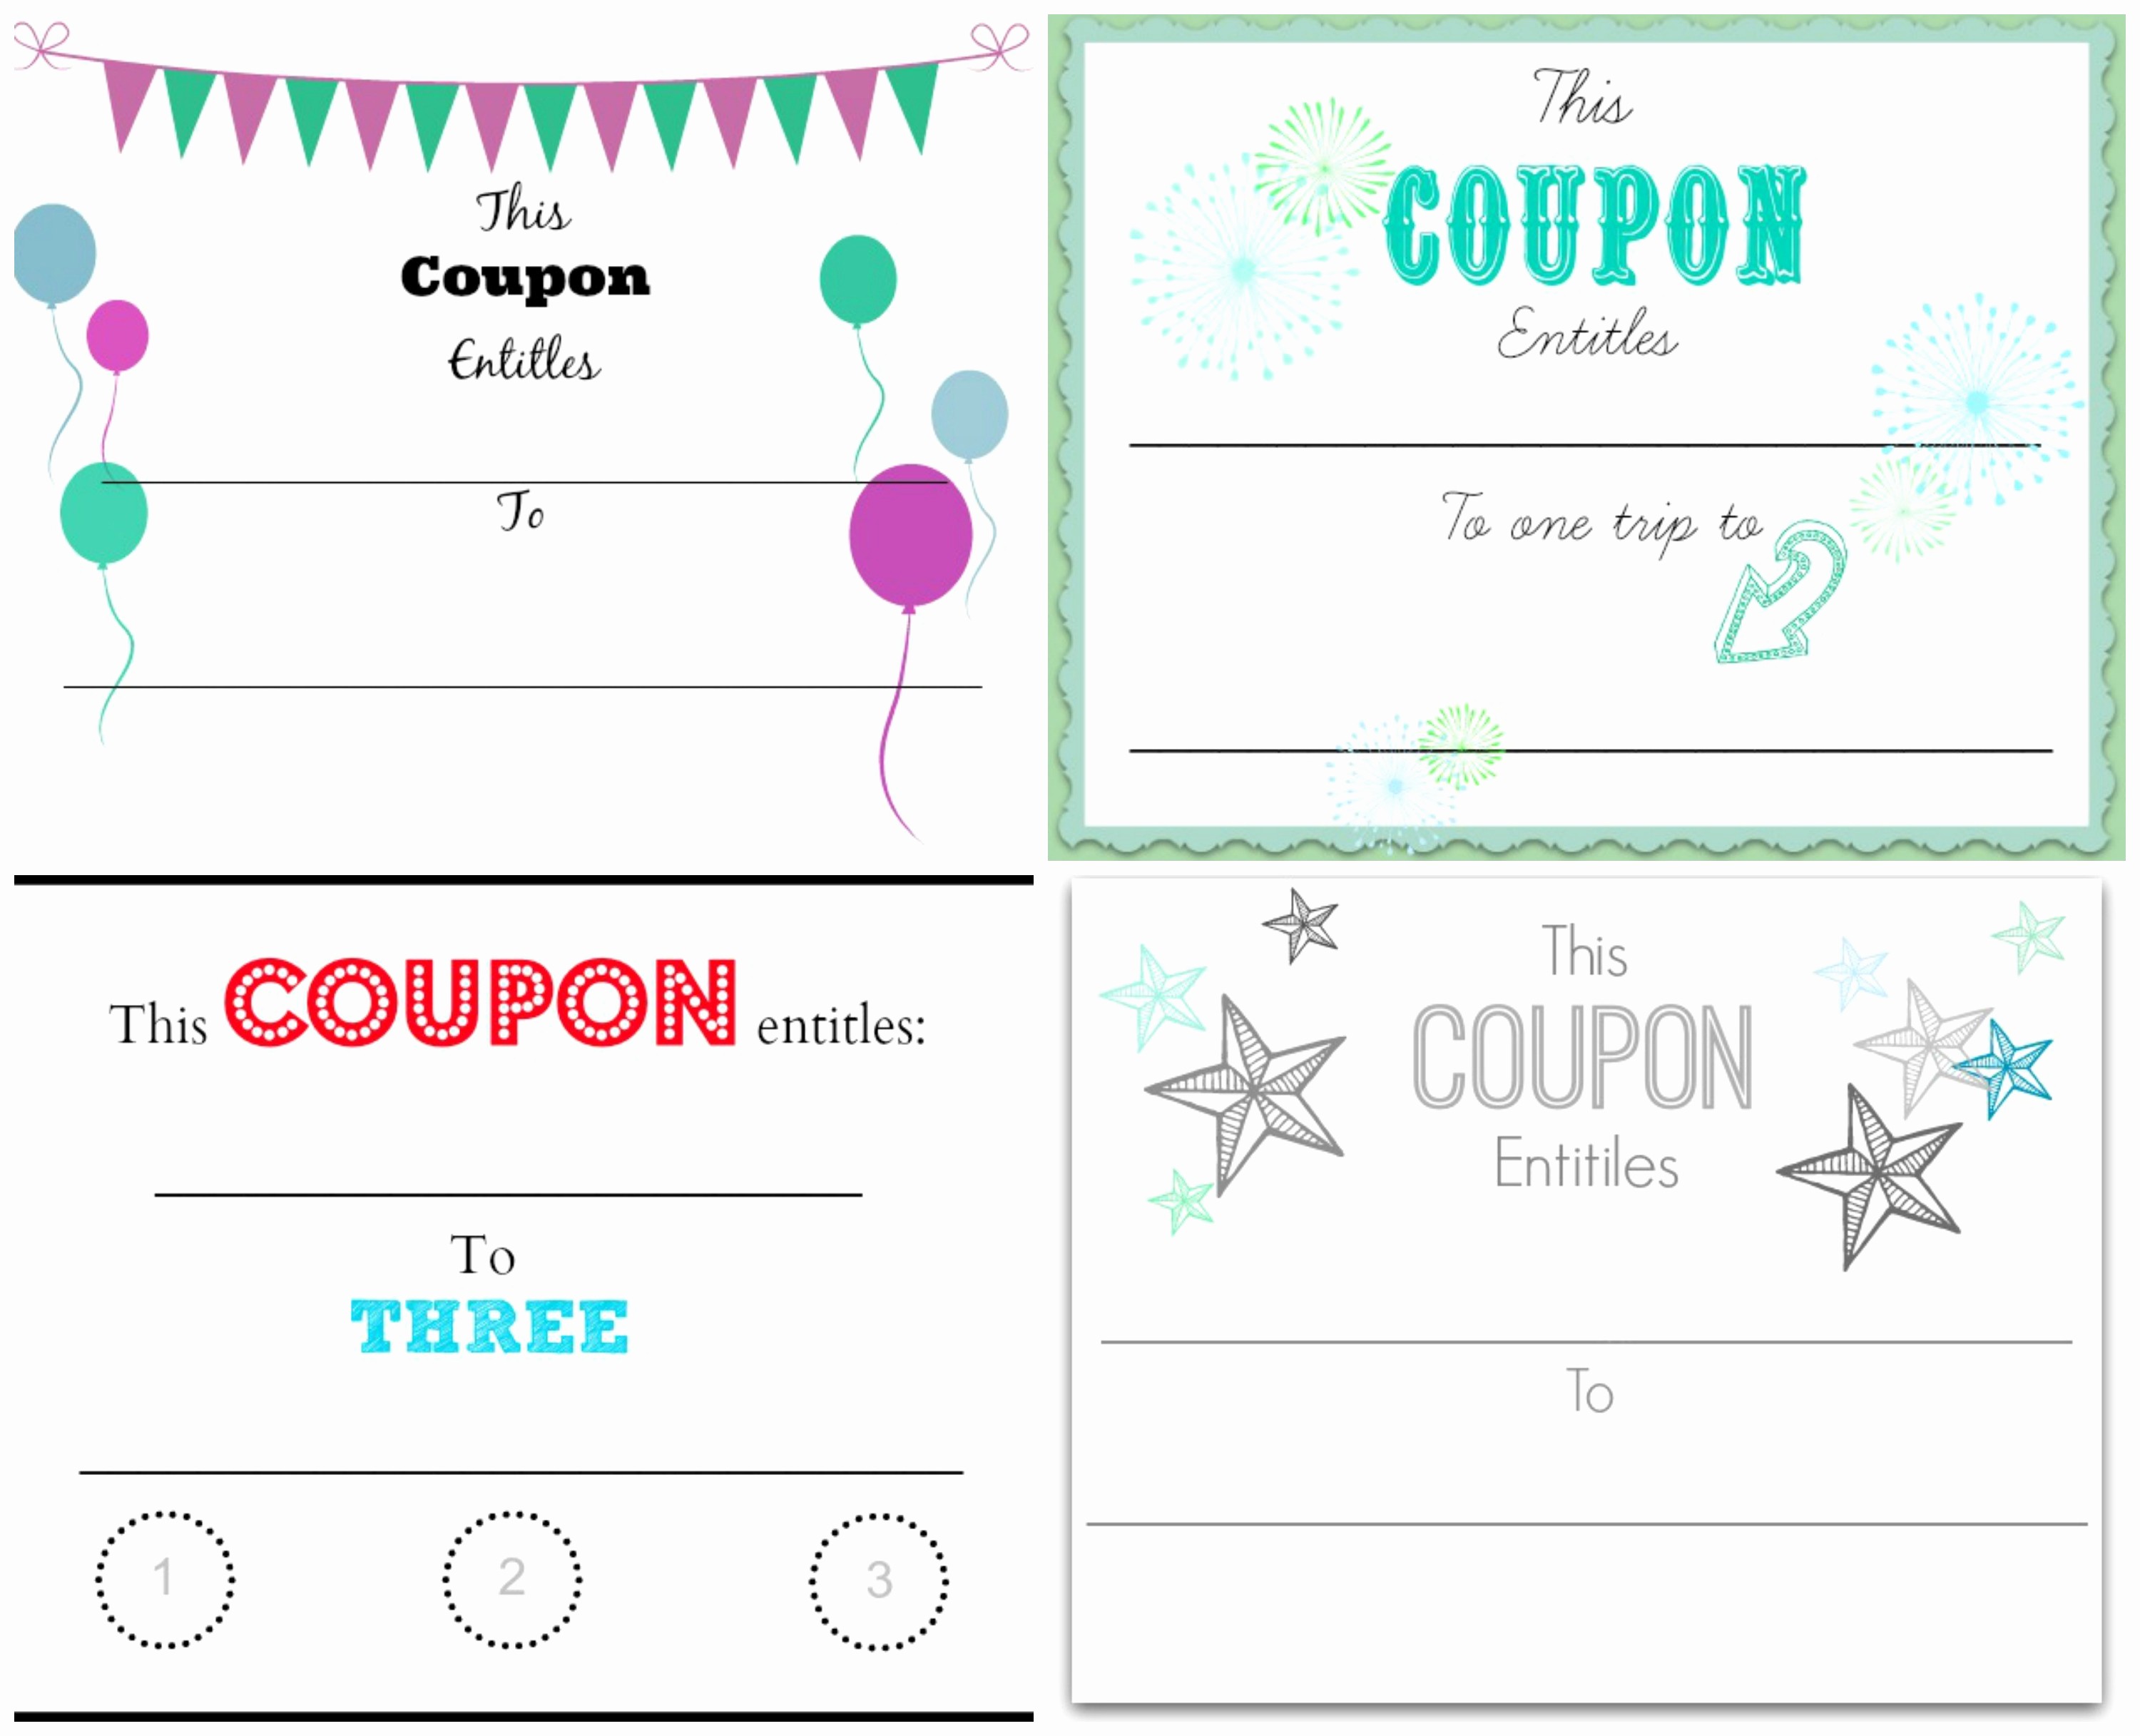 Printable Gift Coupon Templates Free Beautiful This Certificate Entitles You to Template